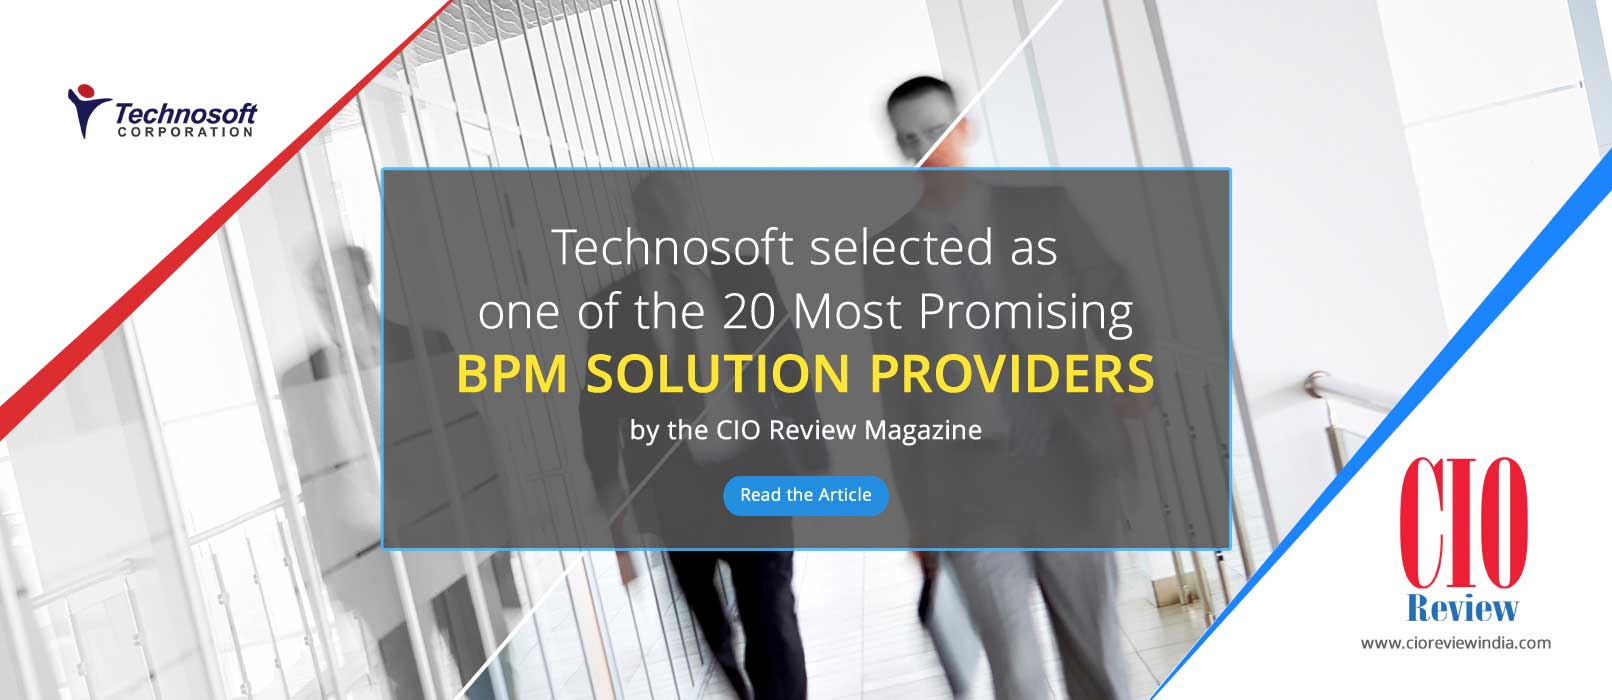 One_of_the_20_Most_Promising_BPM_Solution_Providers_Banner